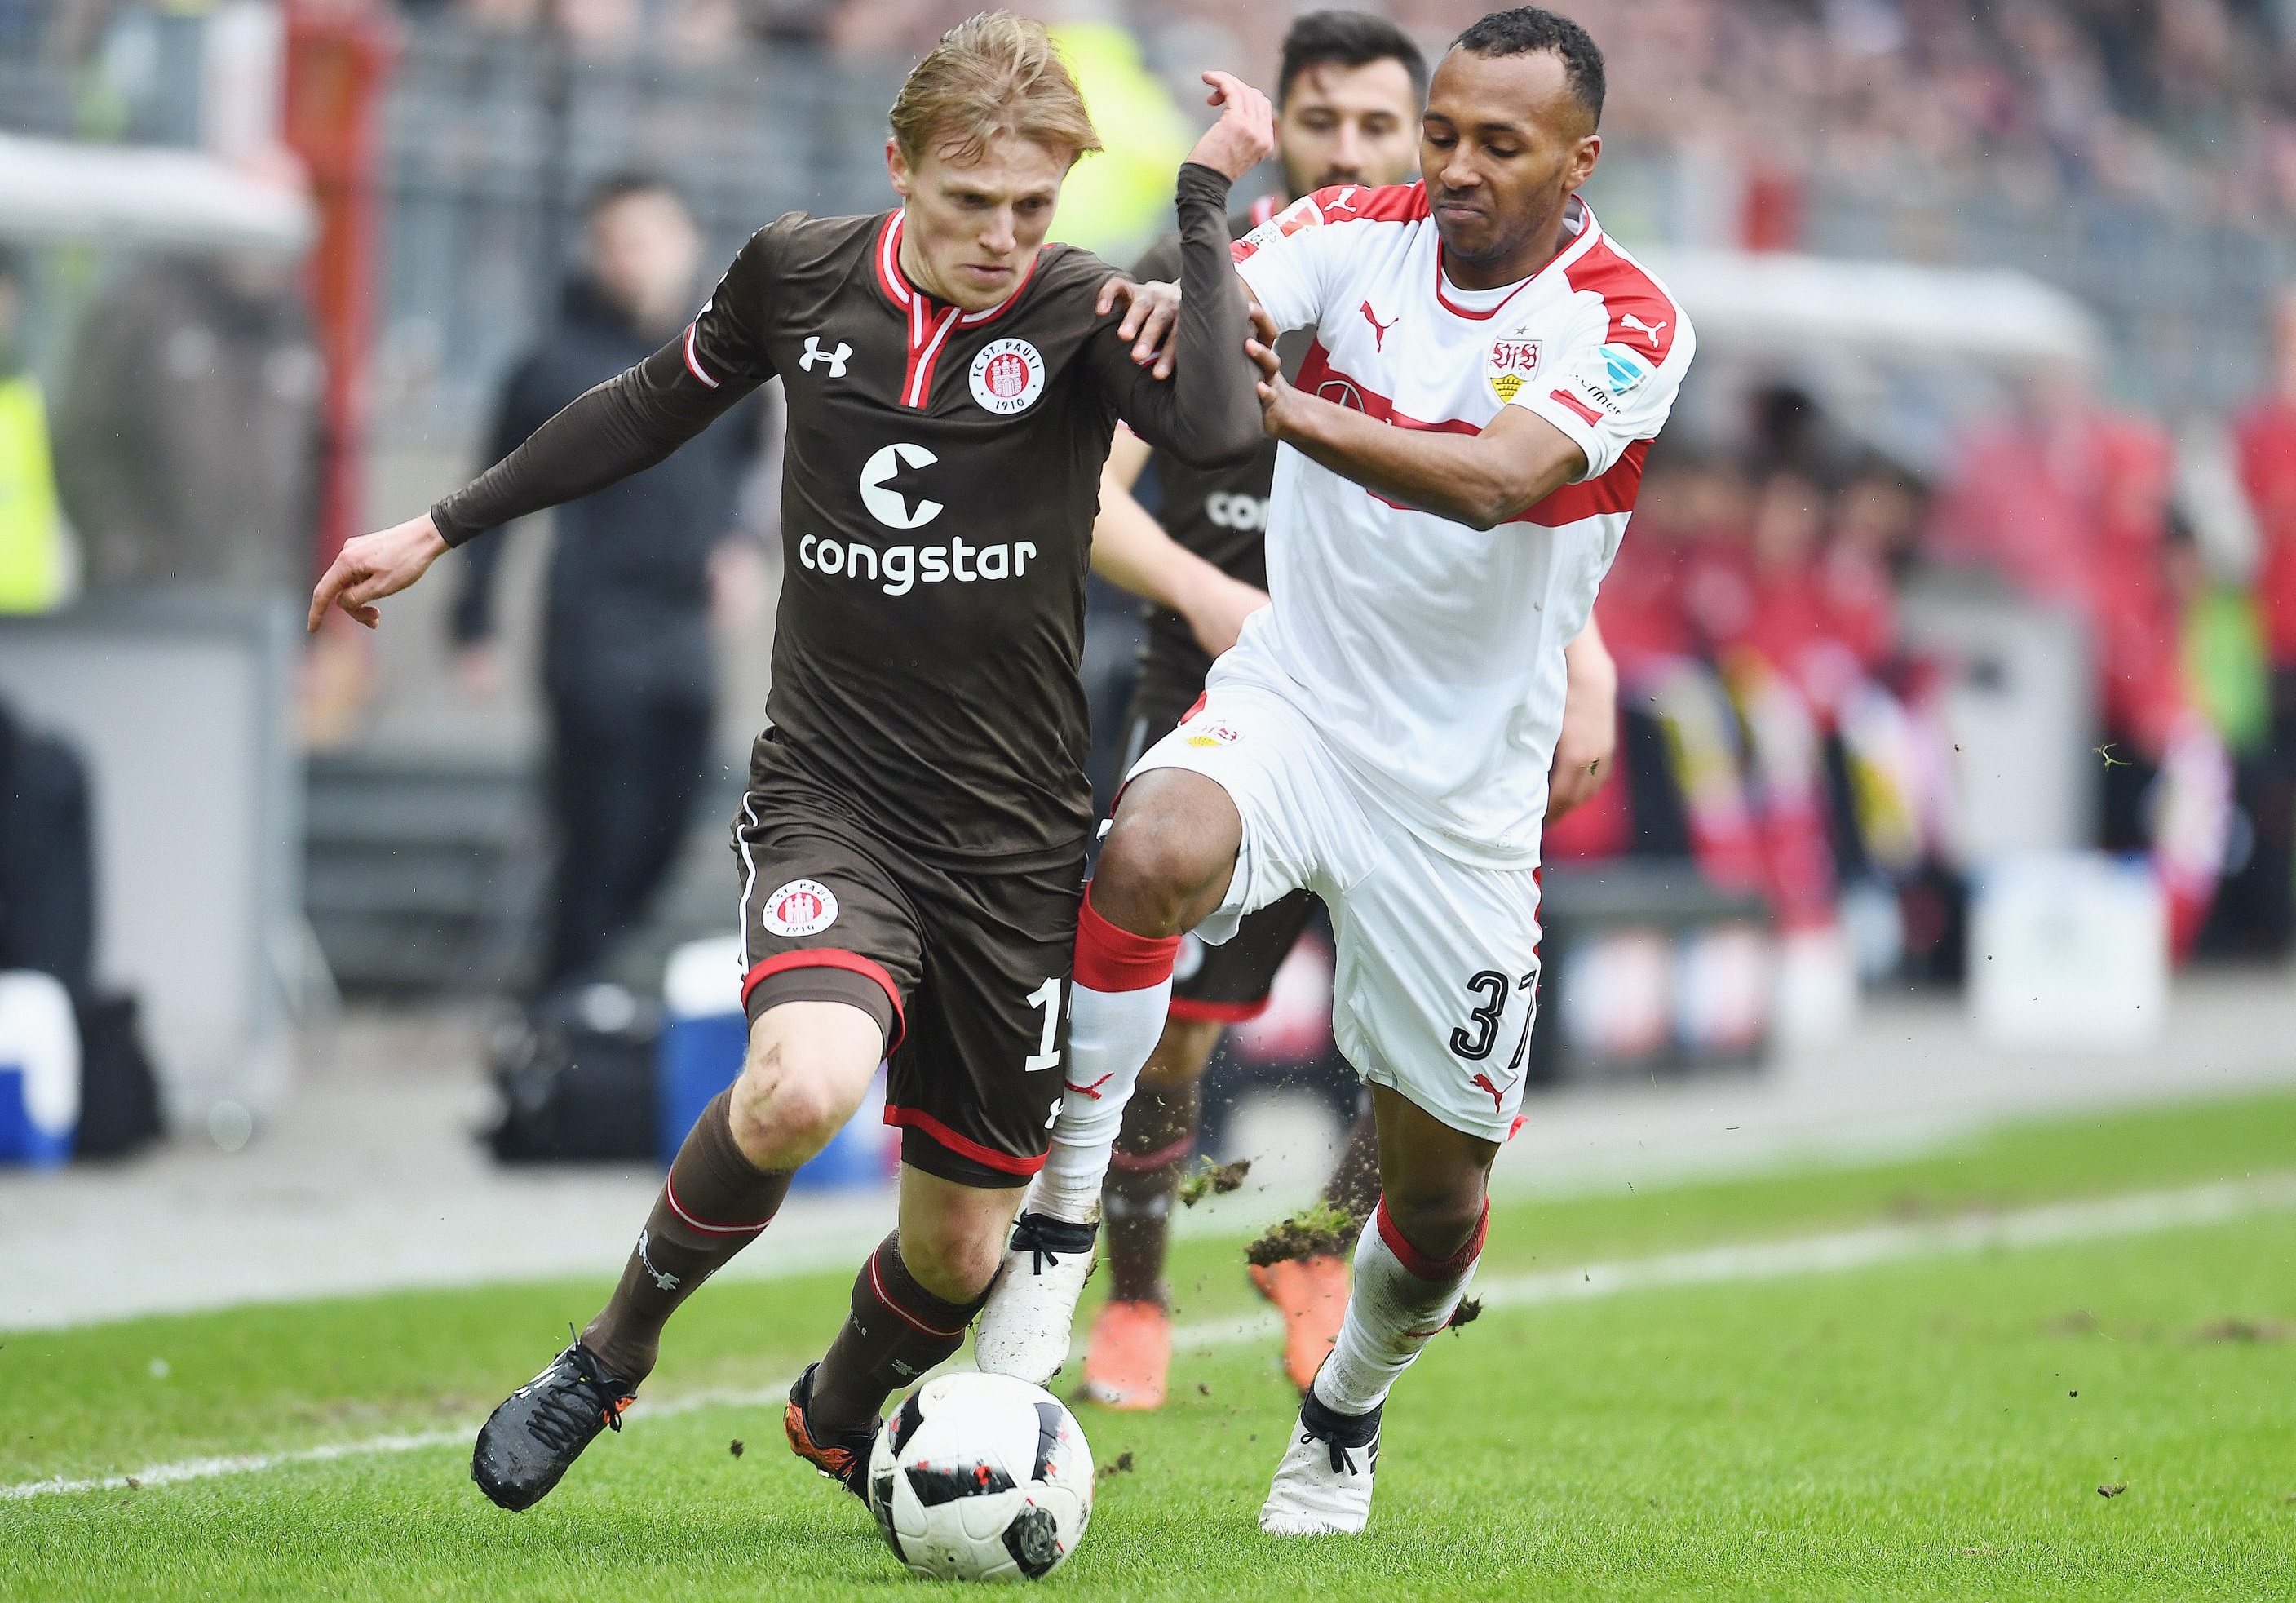 Mats Møller Dæhli & Co produced a committed performance in the first half against Stuttgart.